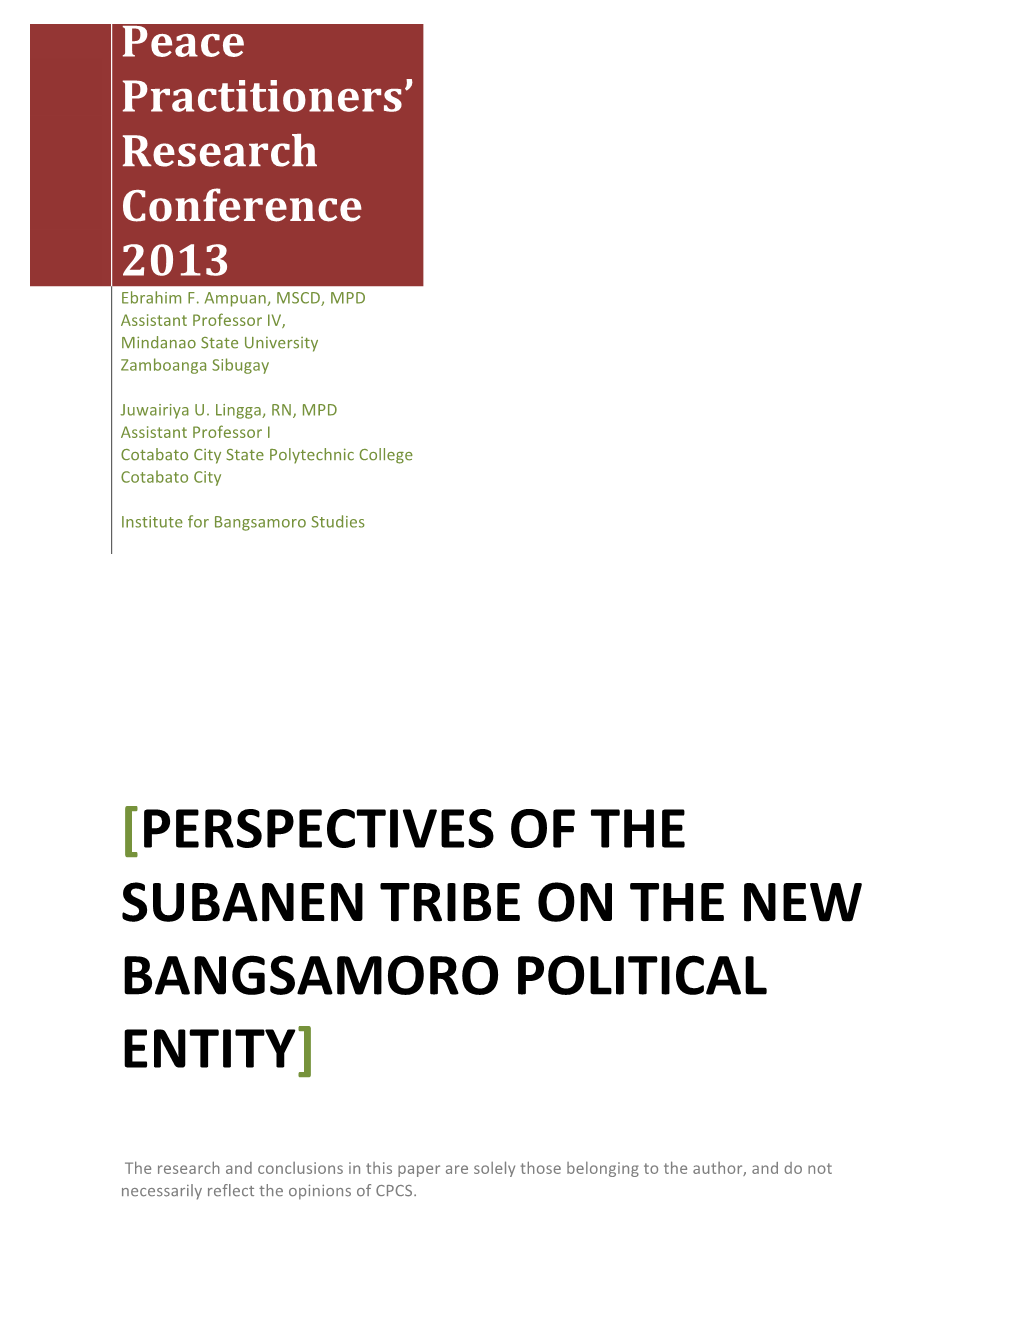 Perspectives of the Subanen Tribe on the New Bangsamoro Political Entity]